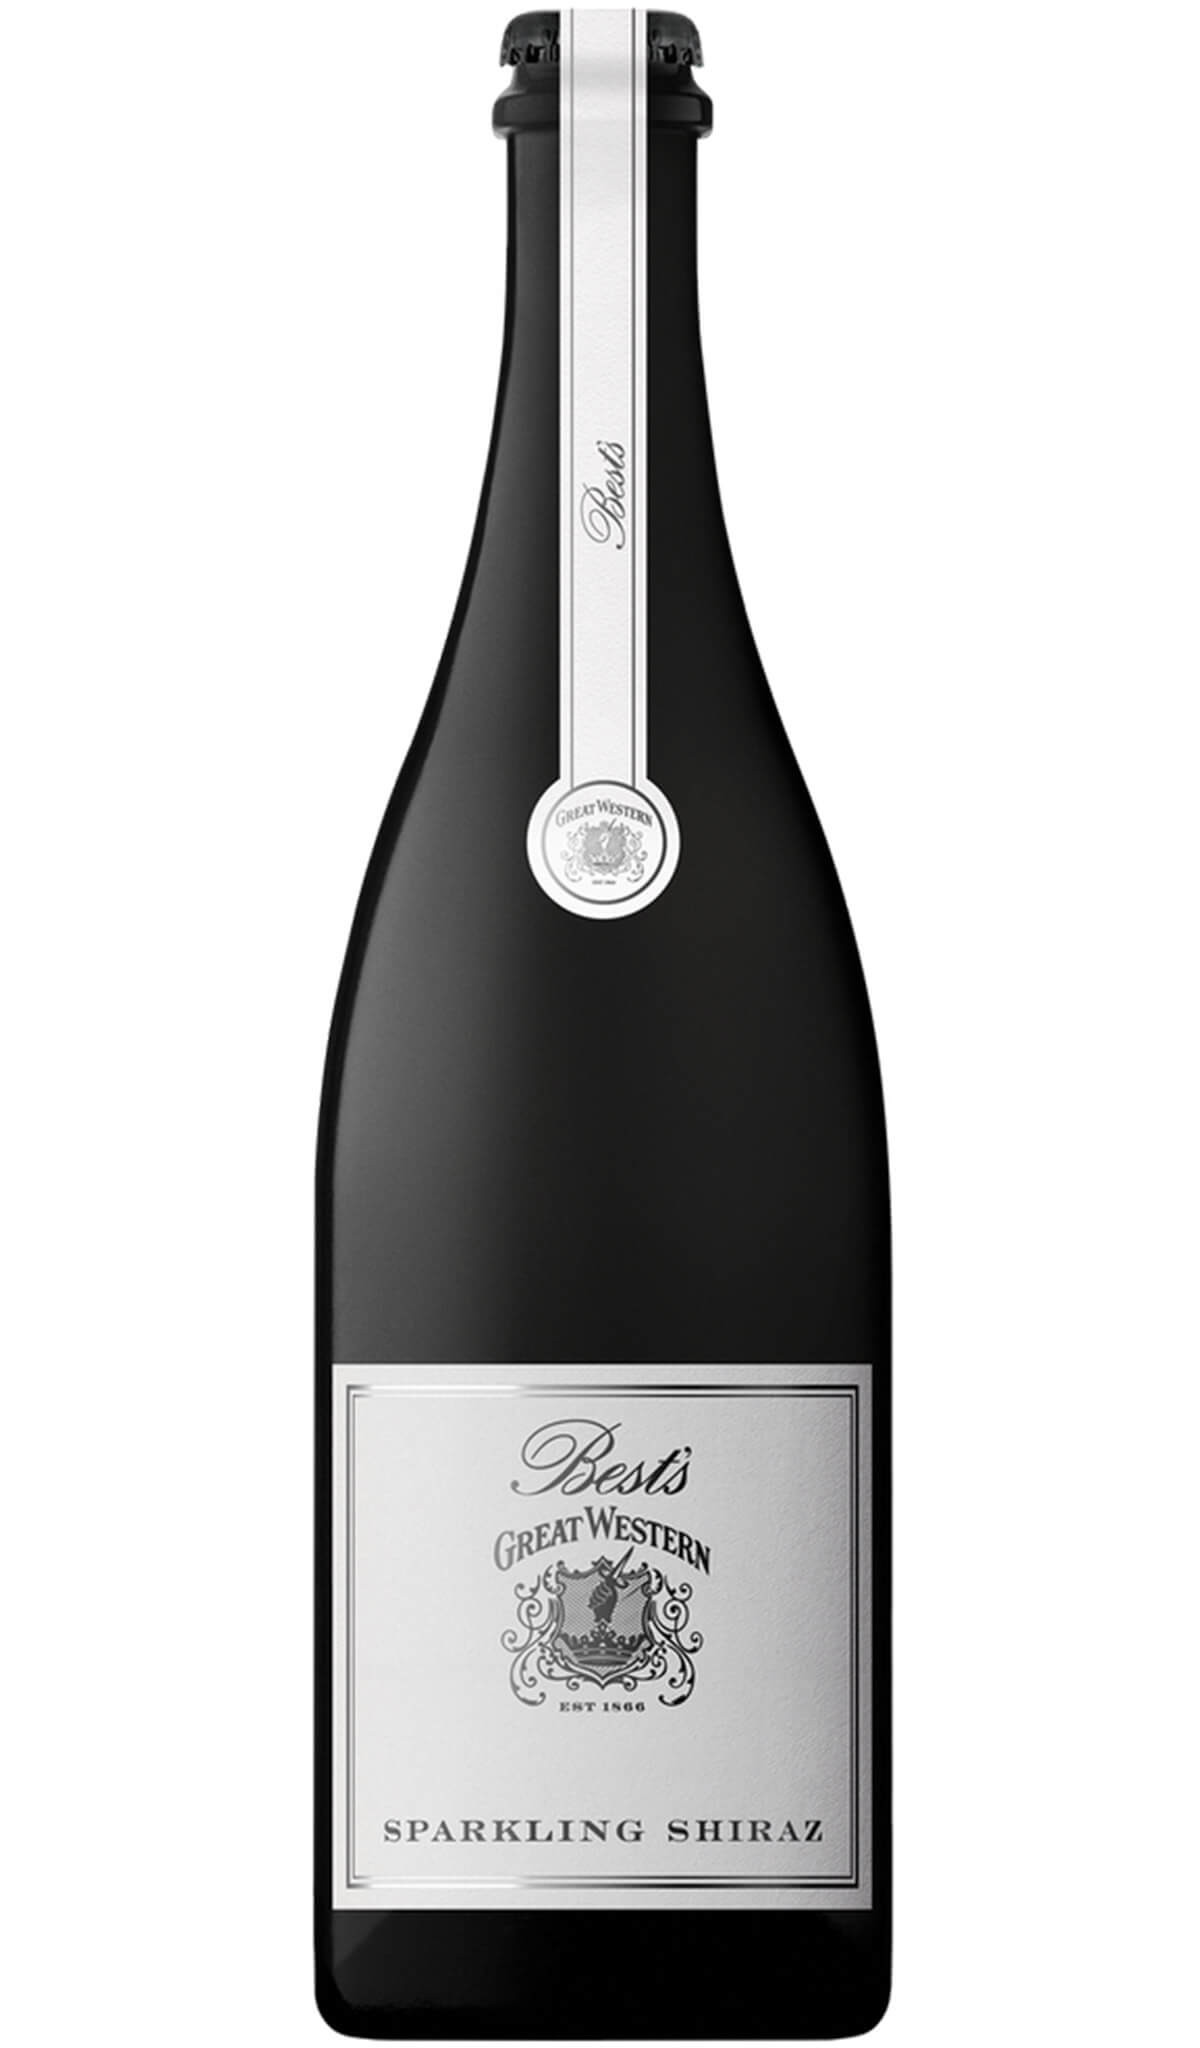 Find out more or buy Best's Wines Great Western Sparkling Shiraz 2019 online at Wine Sellers Direct - Australia’s independent liquor specialists.